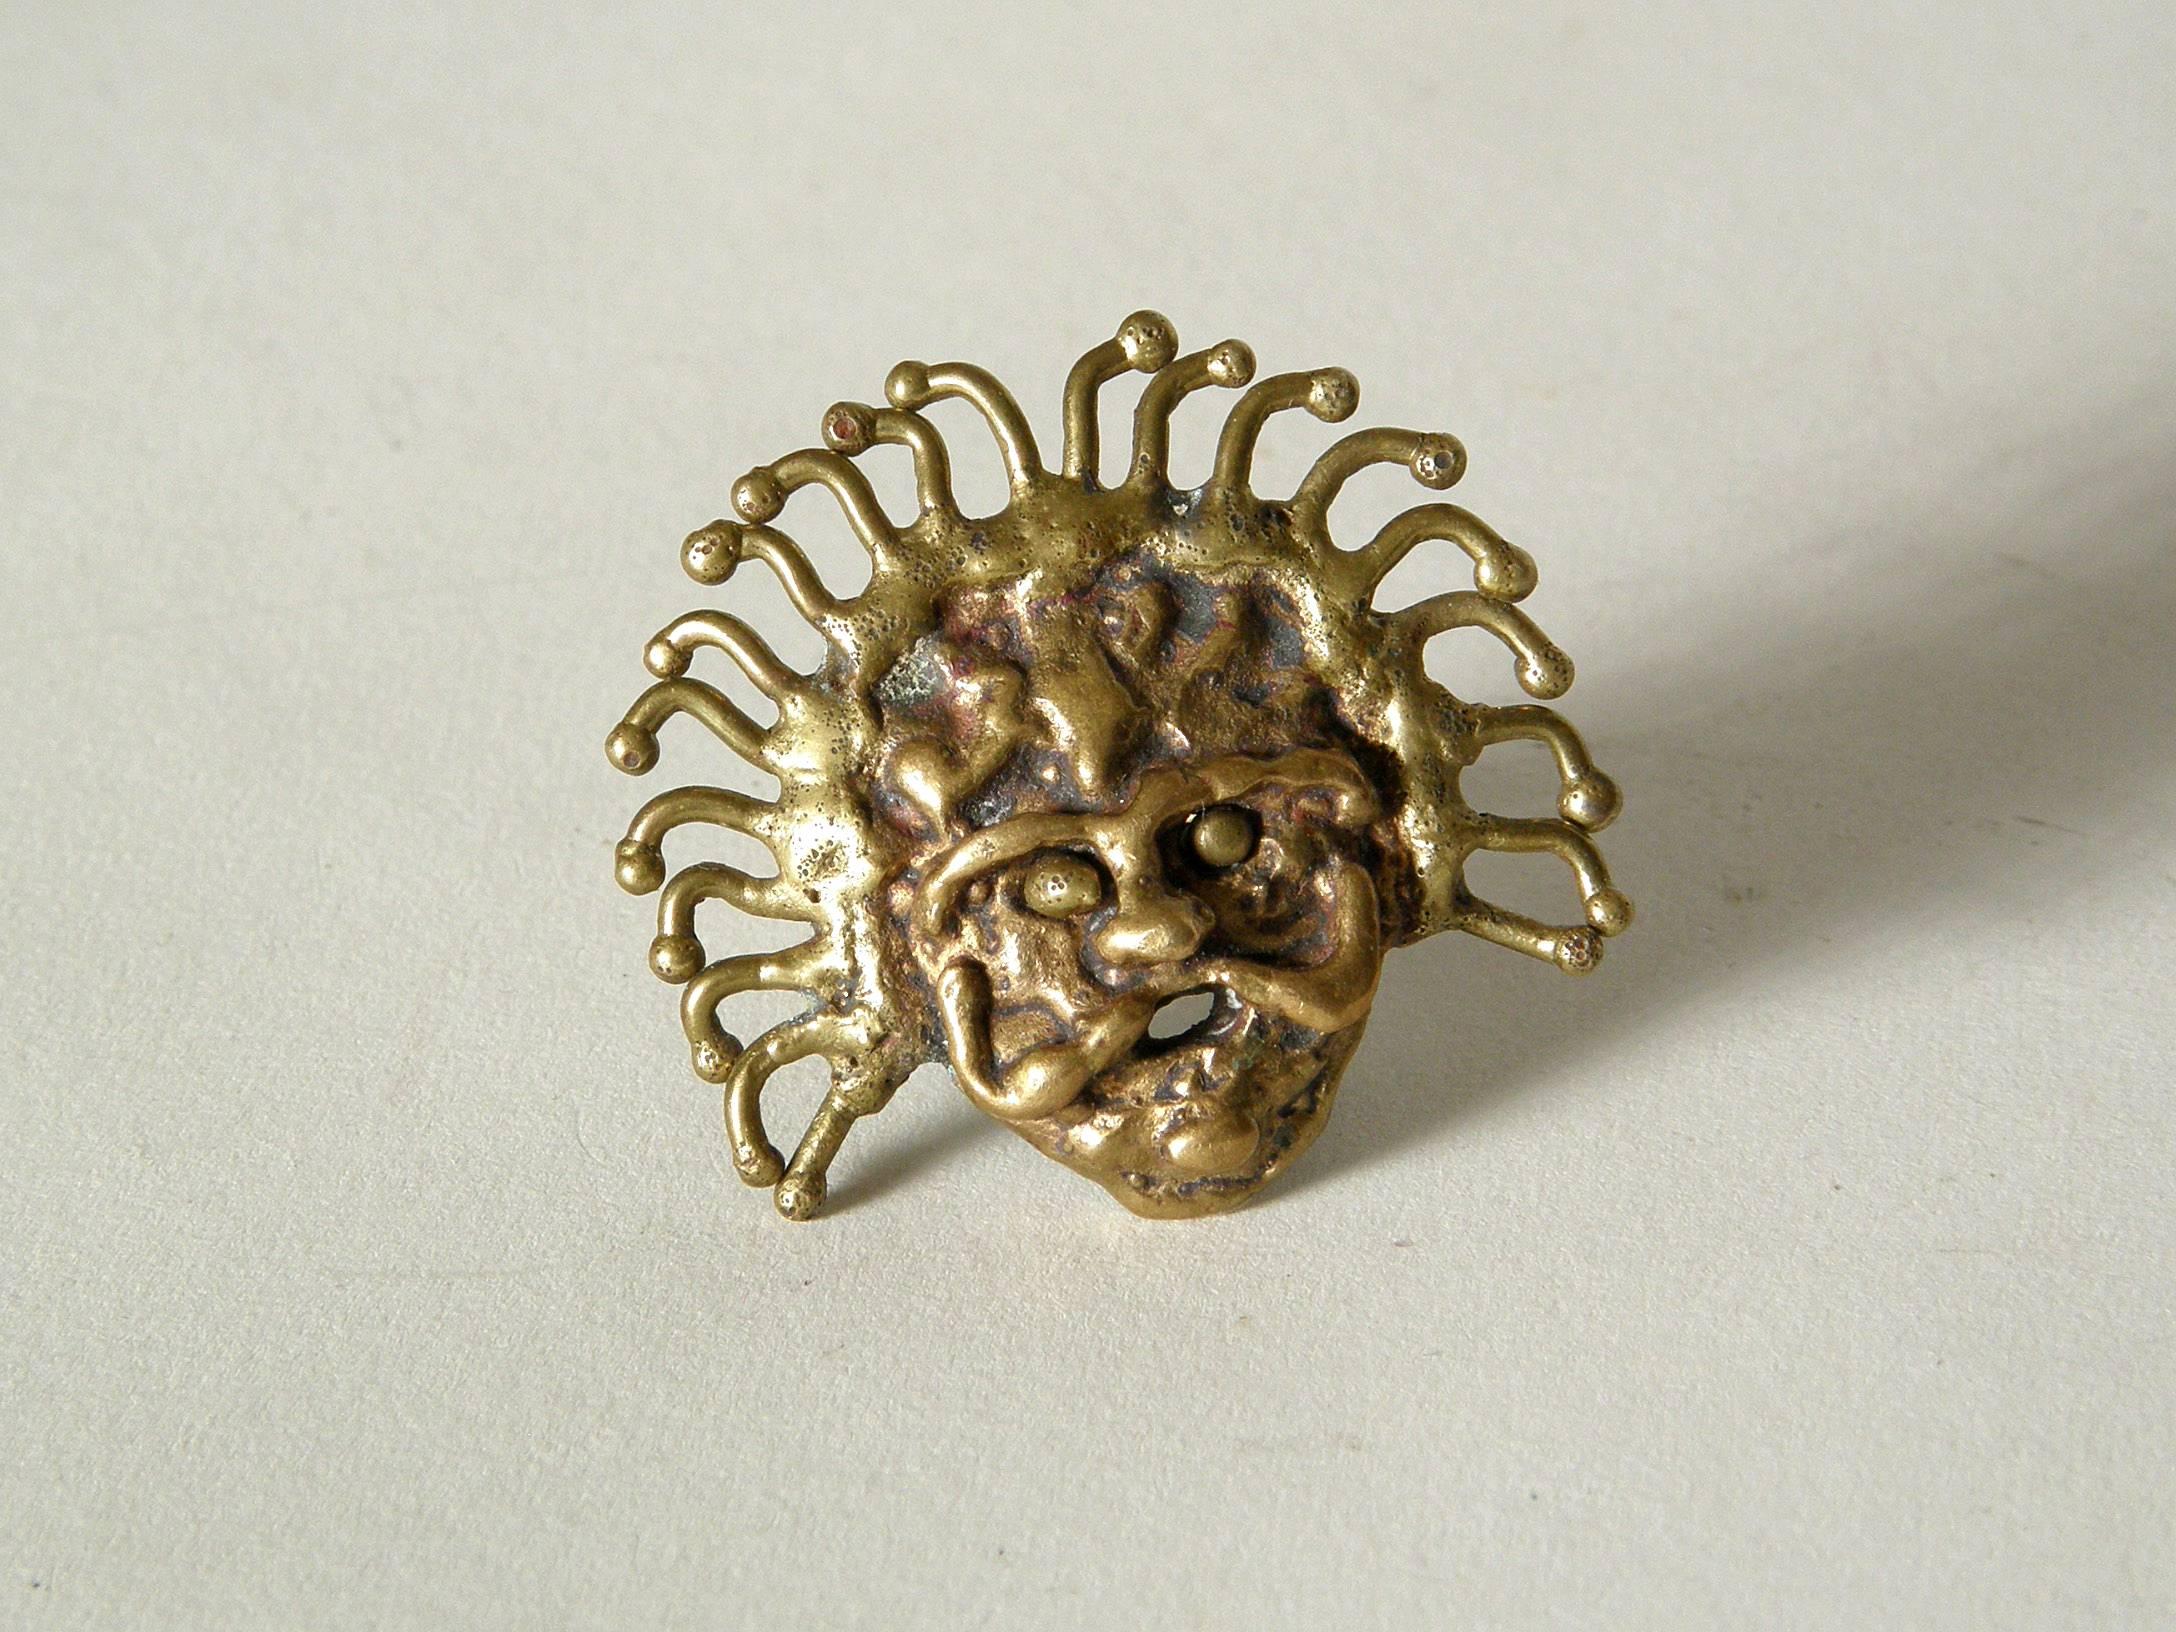 This brutalist face ring has a nice 3-dimensionality, especially with the pierced, open mouth. The molten brass face and radiating crown of hair are very expressive. We bought this ring with several other pieces, including a signed Pal Kepenyes